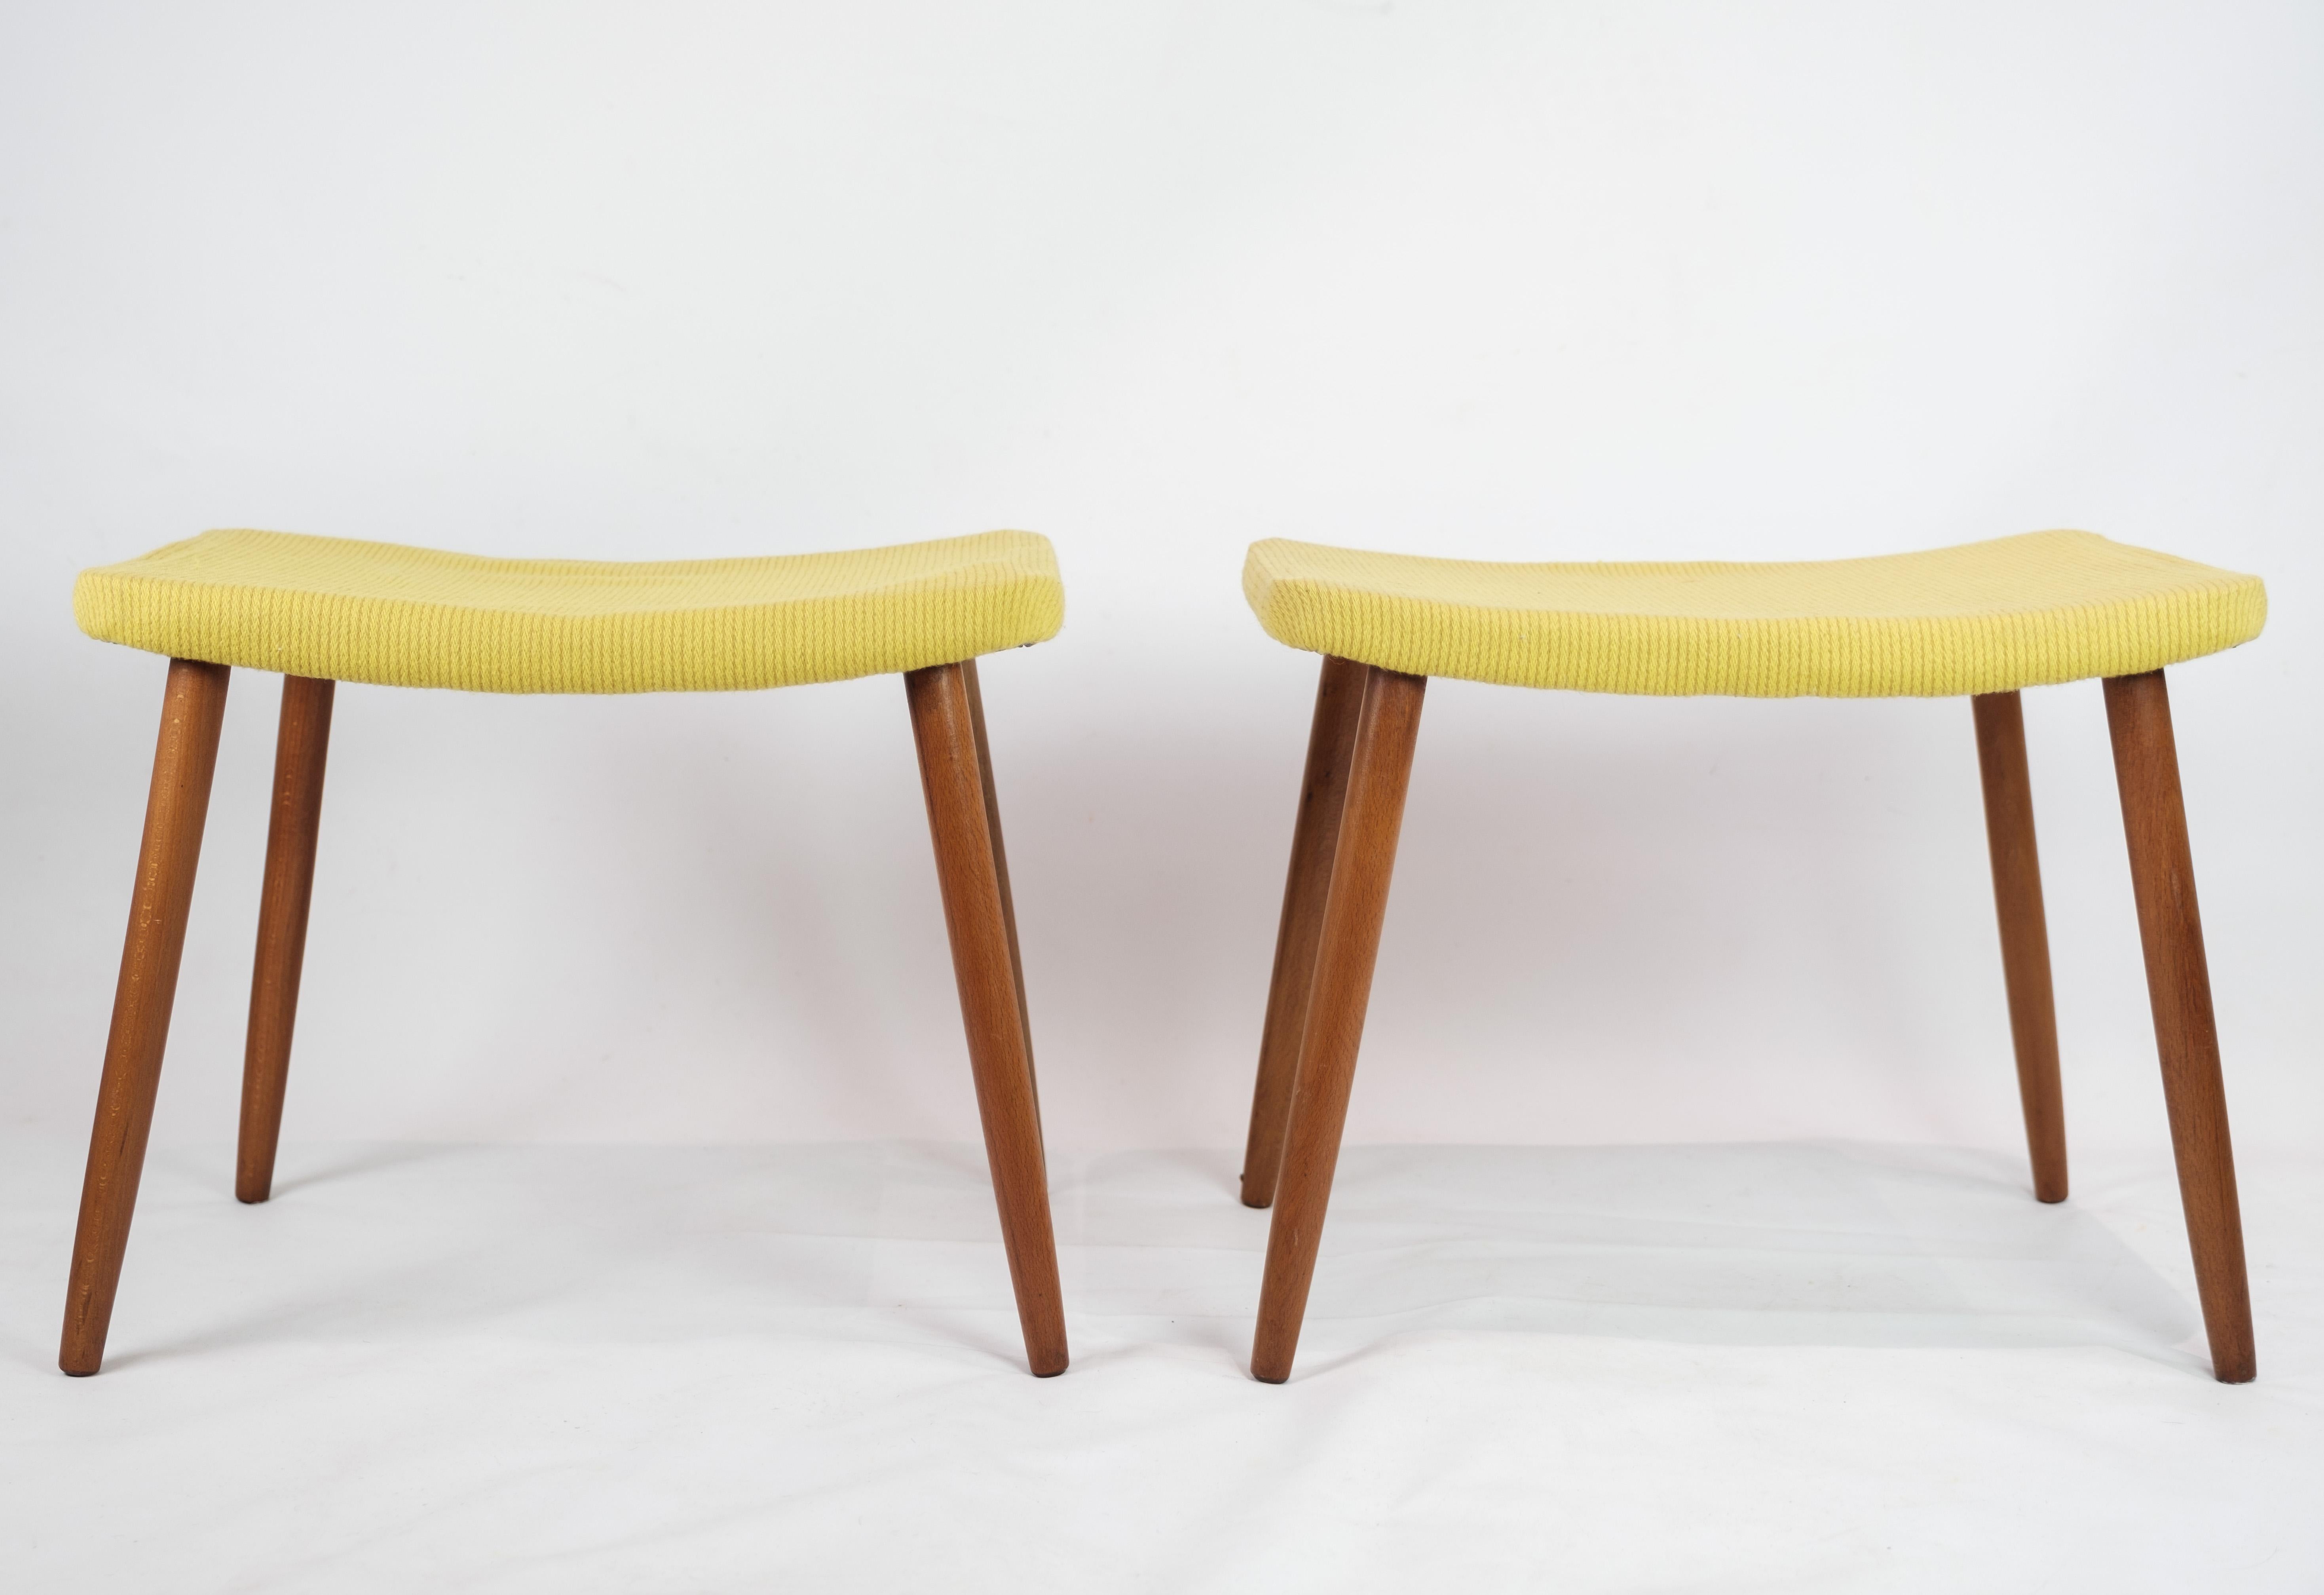 This vintage stool exudes the quintessential charm of Danish design from the 1960s, showcasing a delightful combination of style and functionality. Adorned with vibrant yellow fabric upholstery and complemented by elegant teak legs, this stool adds